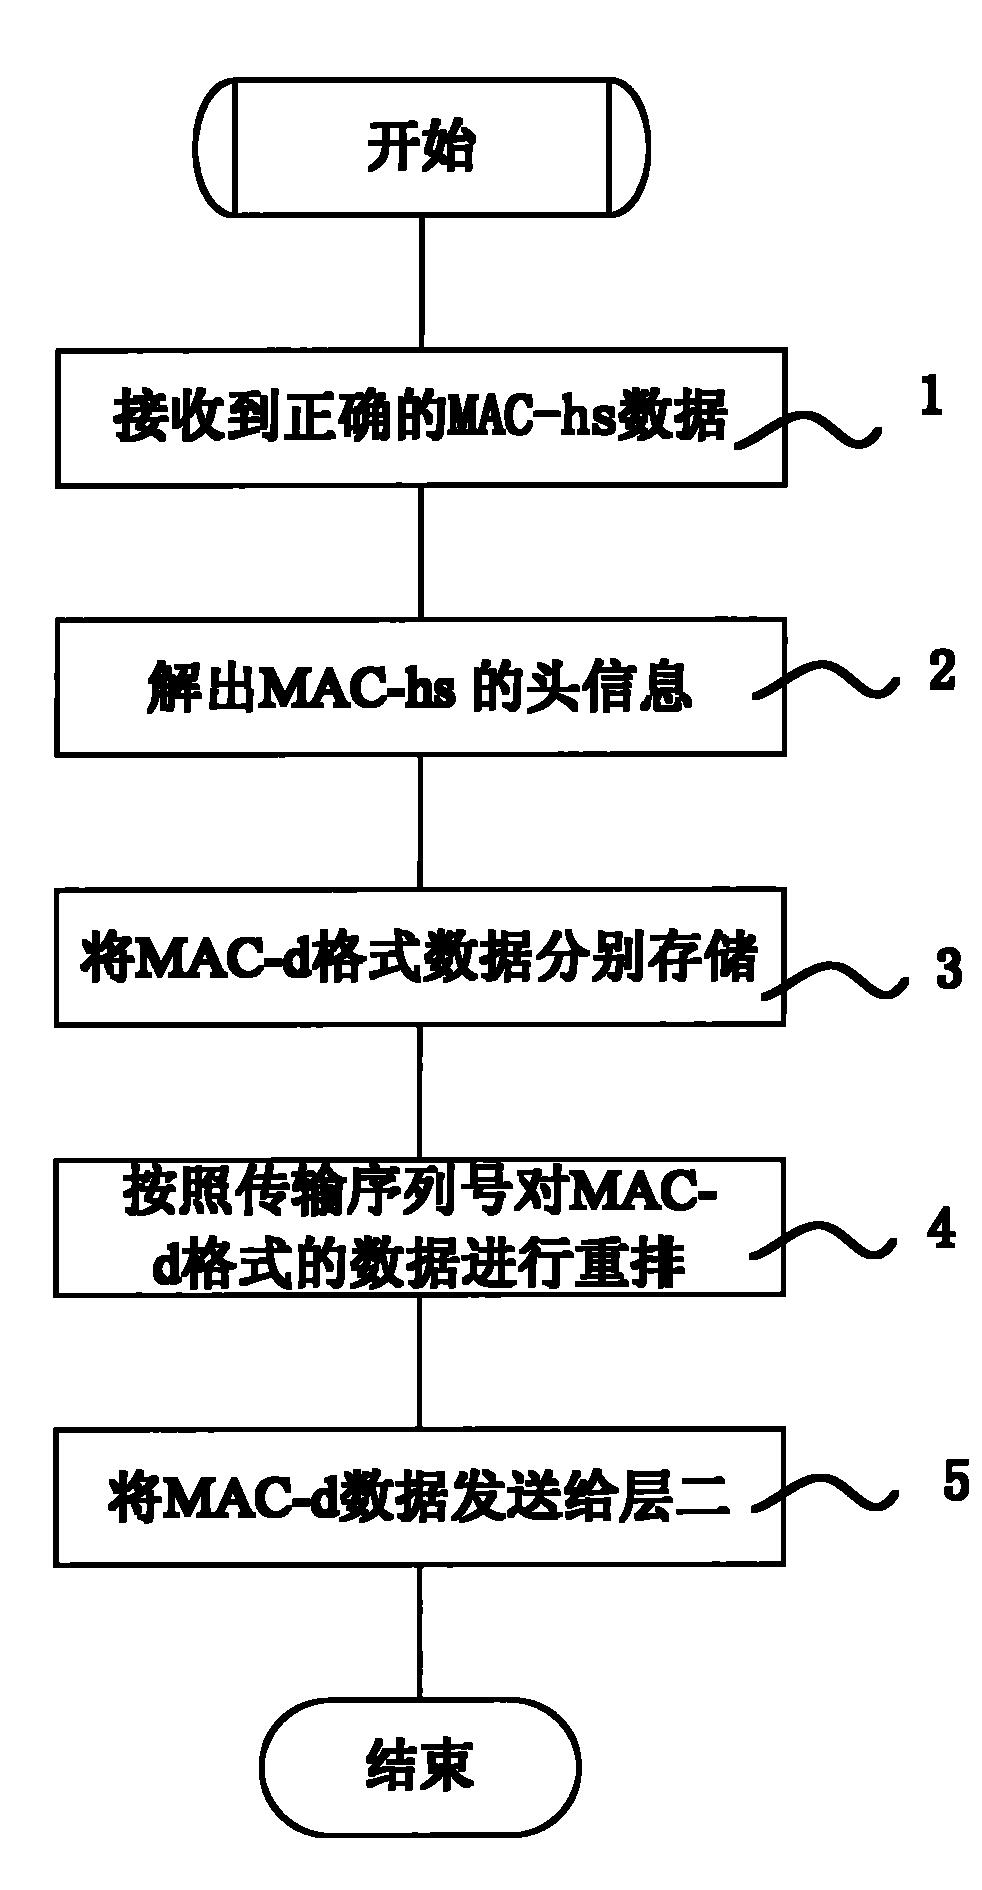 Method for quickly processing MAC-hs package data